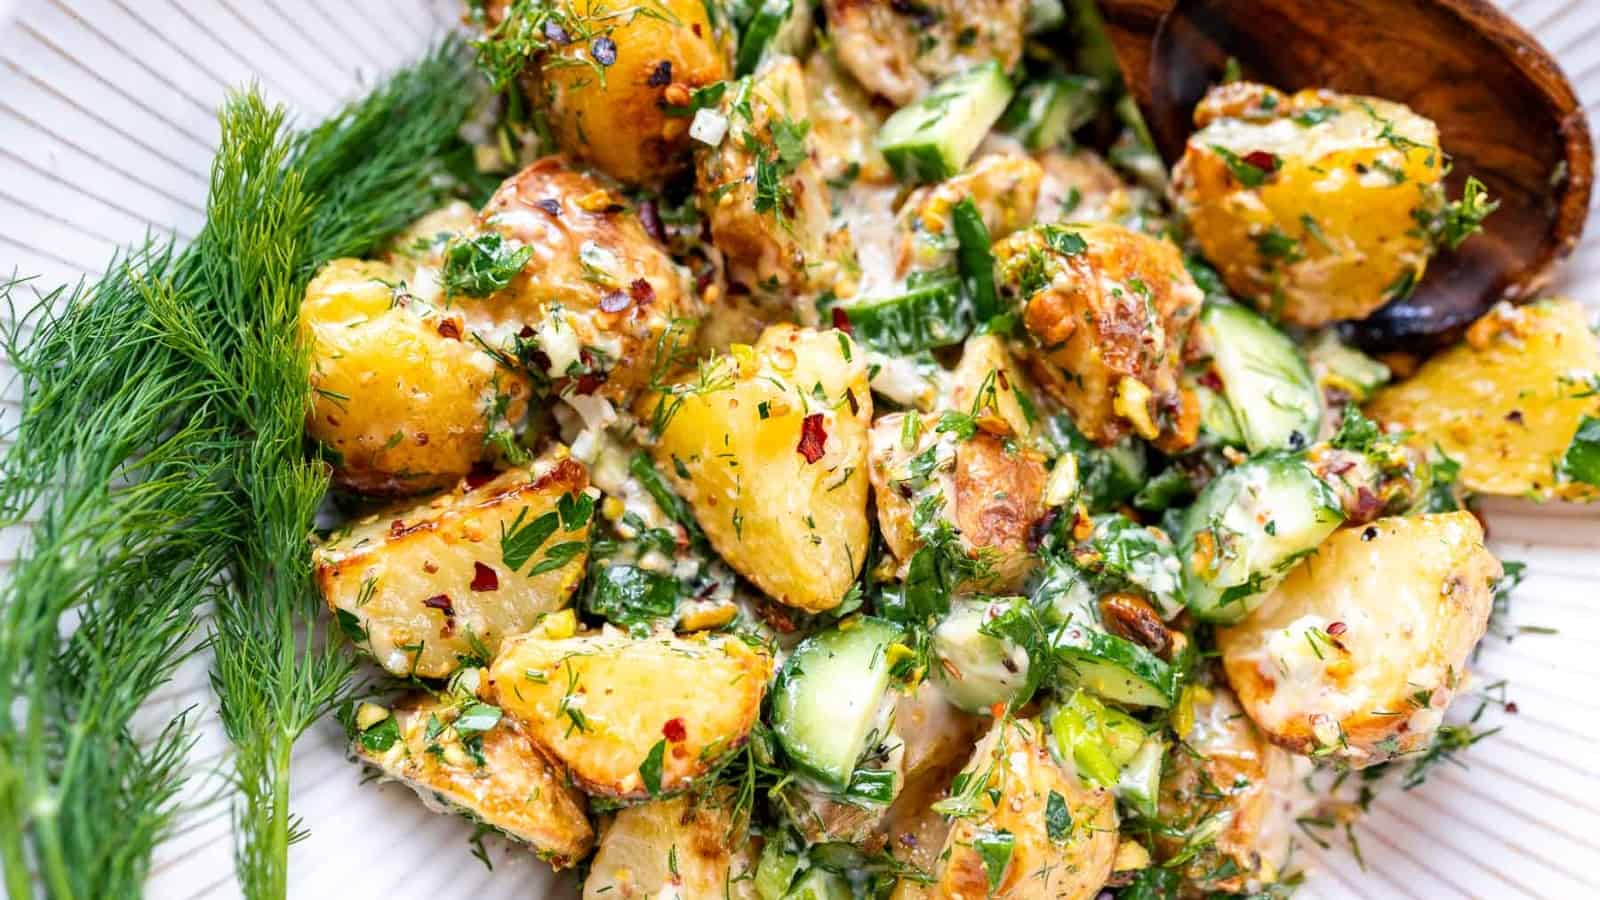 A close shot of roasted potatoes and veggies topped with fresh herbs and spices.